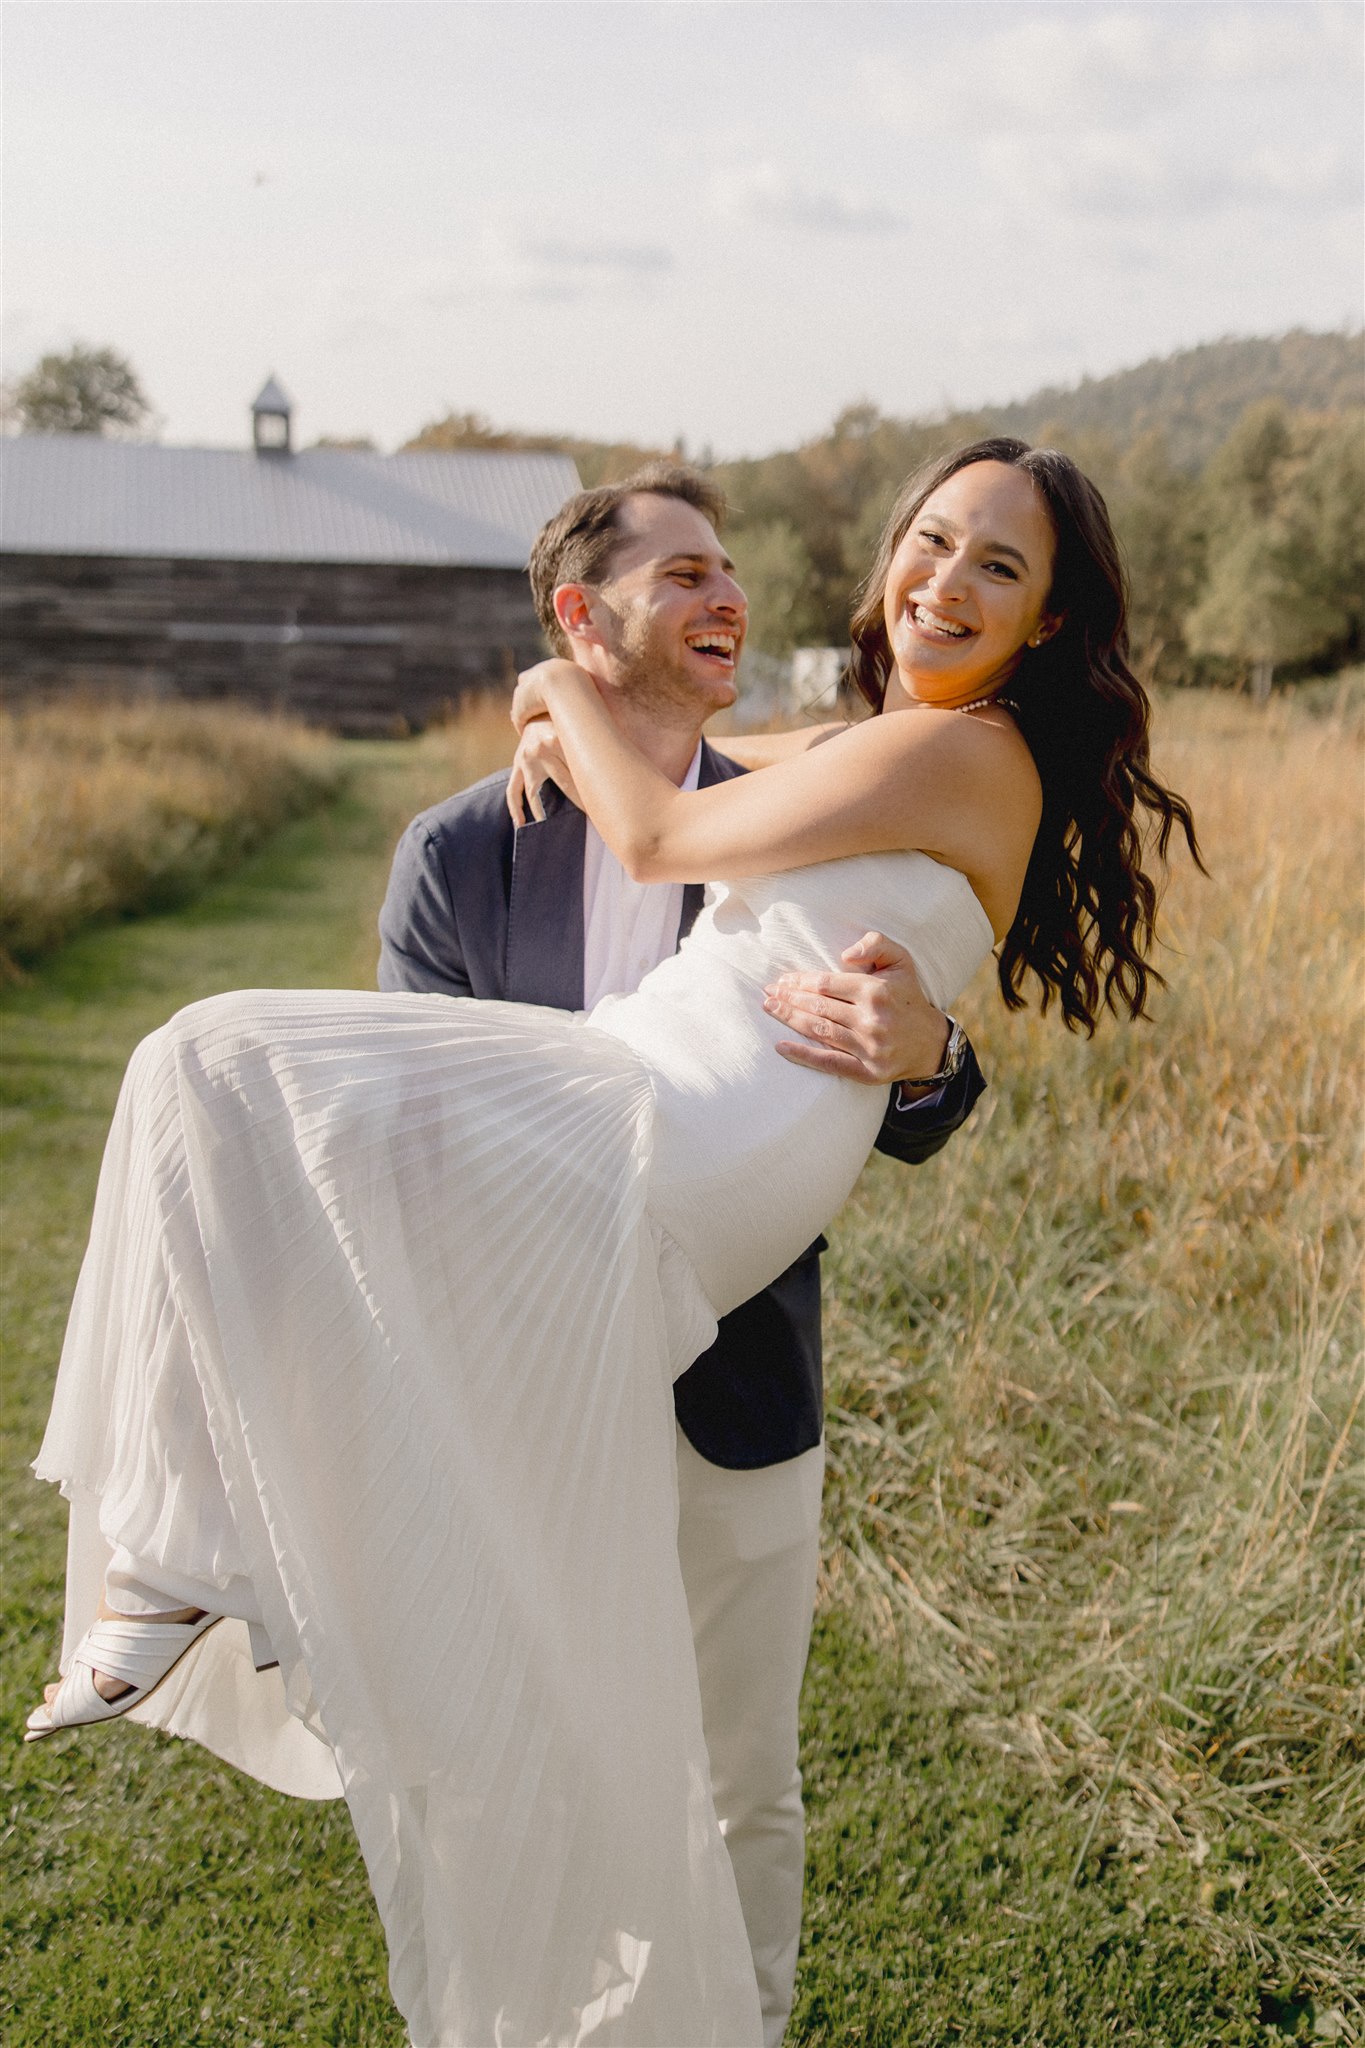 Beautiful husband and bride share a laugh together during their wedding rehearsal photoshoot